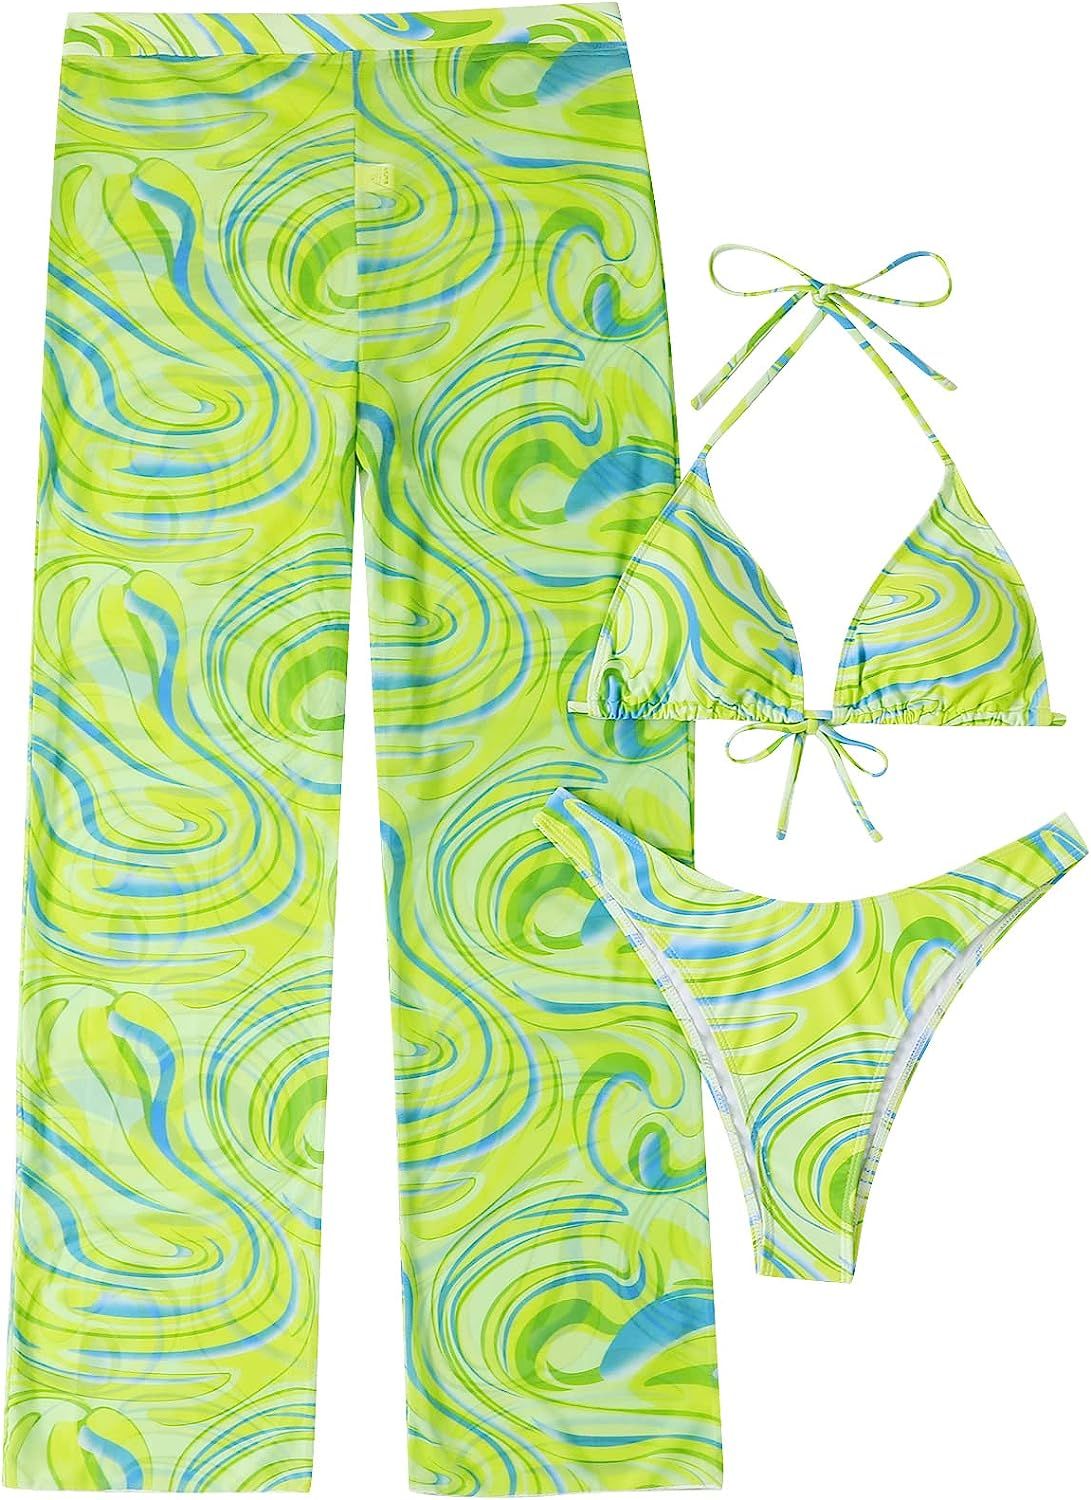 SOLY HUX Women's Printed Halter Bikini Bathing Suits with Cover Up Pants 3 Piece Swimsuits | Amazon (US)